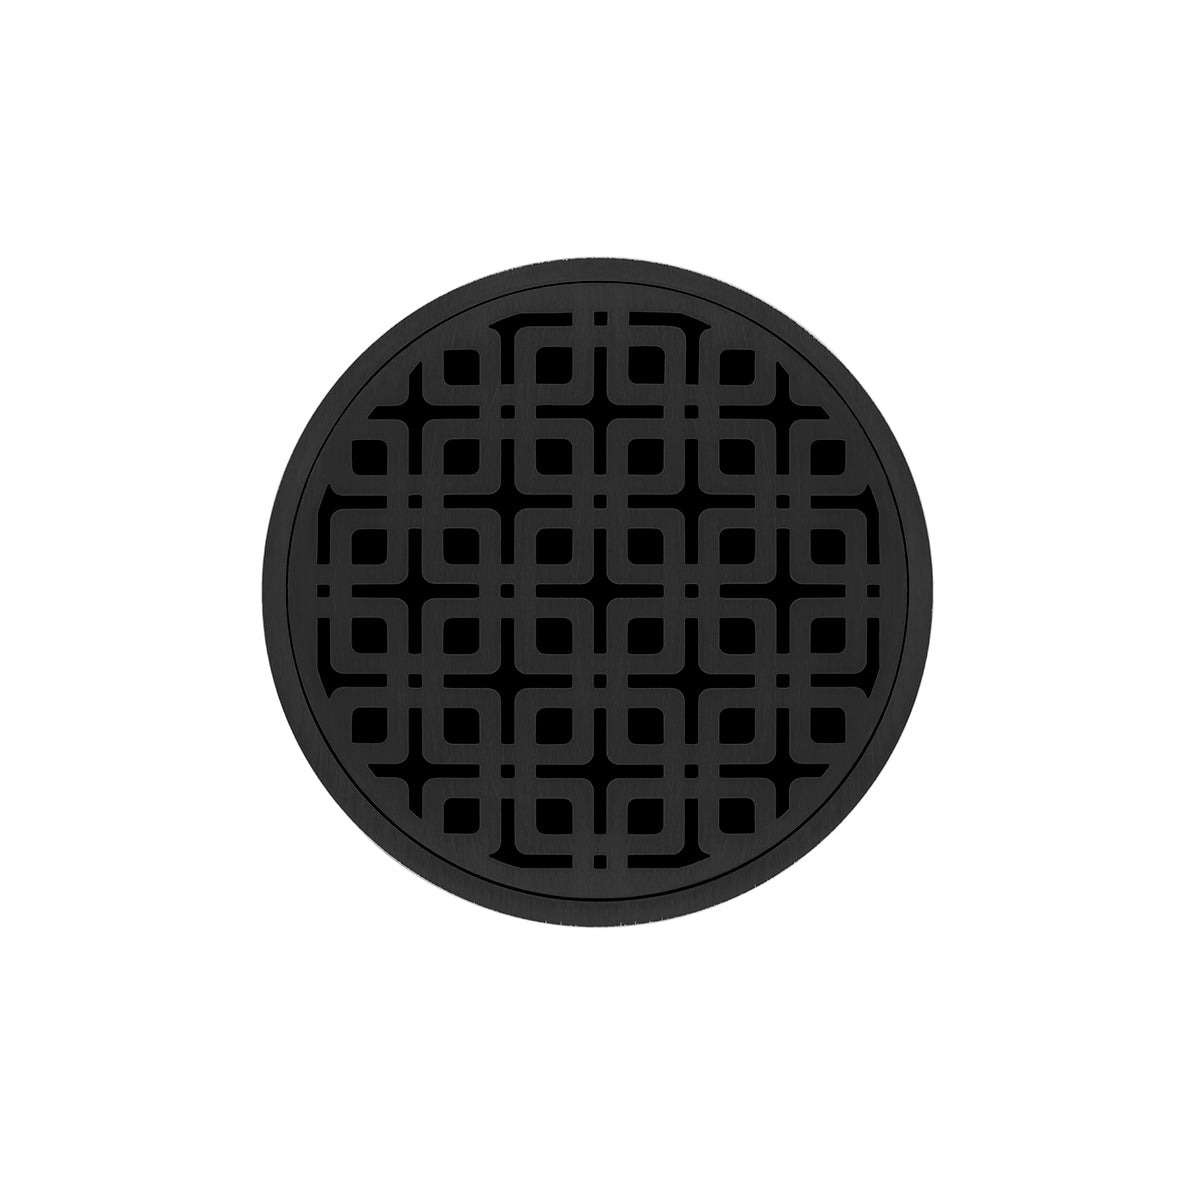 Infinity Drain 5" Round RKD 5 Premium Center Drain Kit with Link Pattern Decorative Plate with PVC Drain Body, 2" Outlet